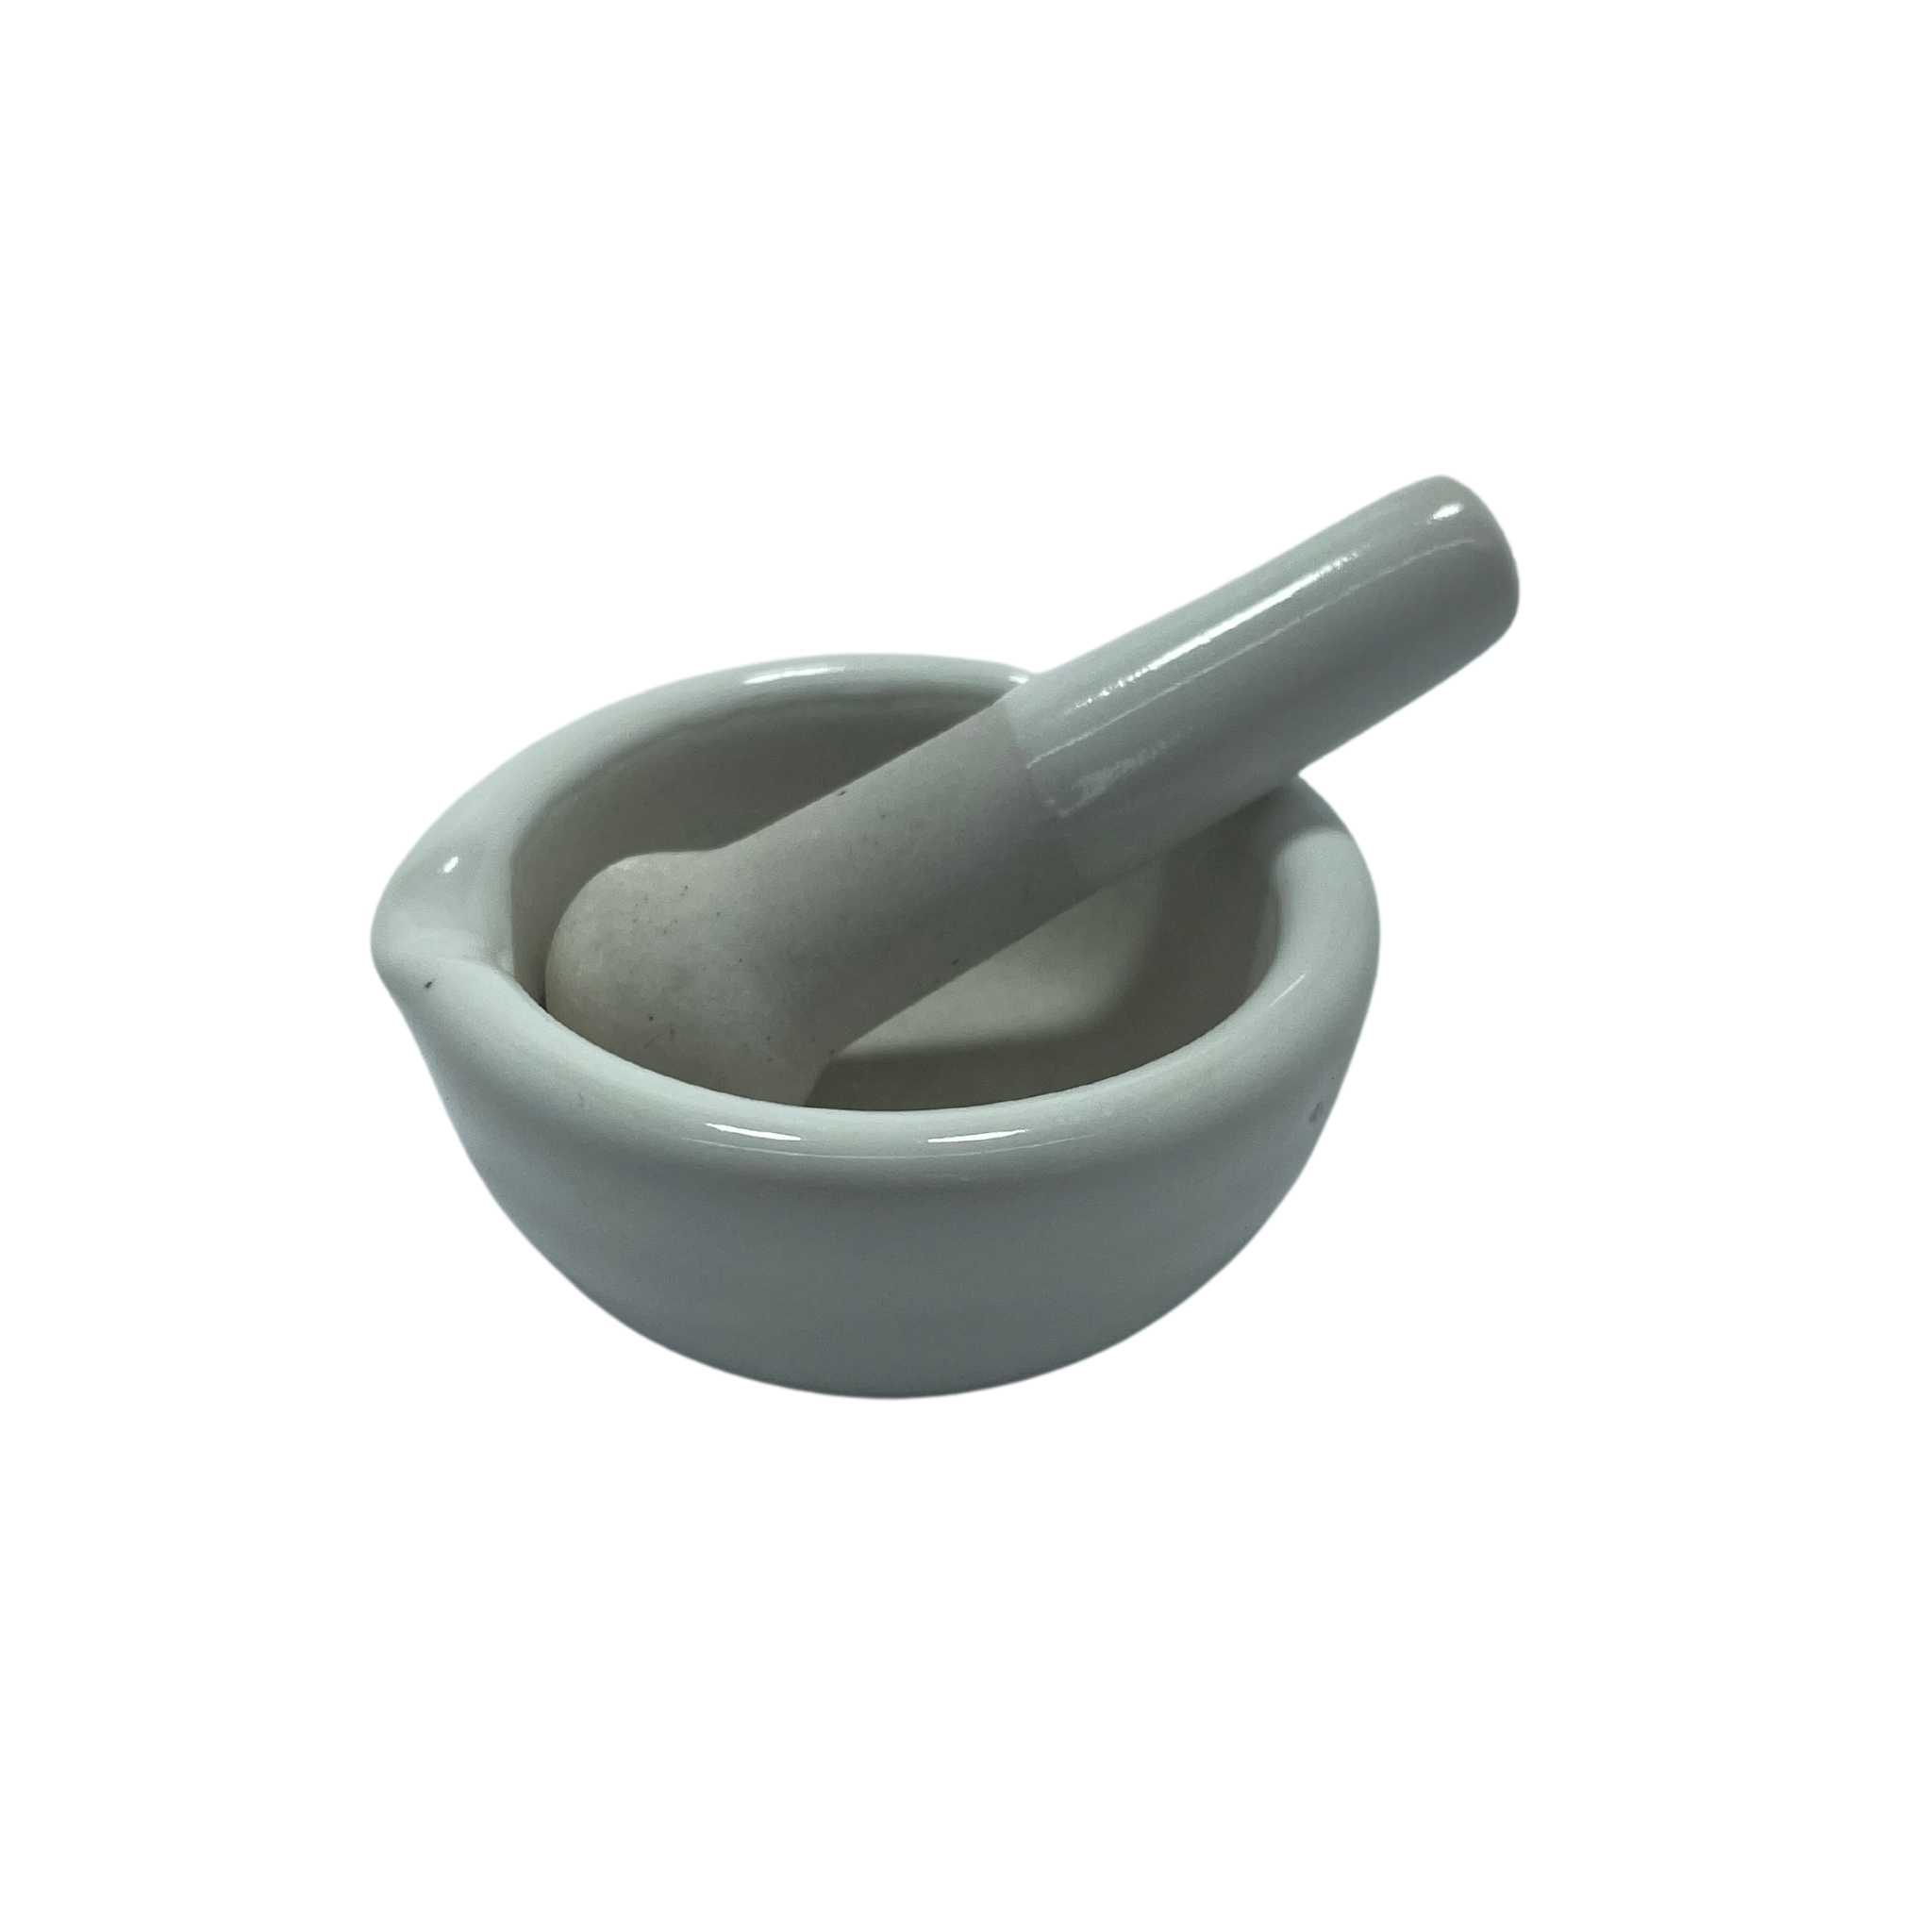 Mortar & Pestle: Uses and its Benefits – Science Equip Pty Ltd